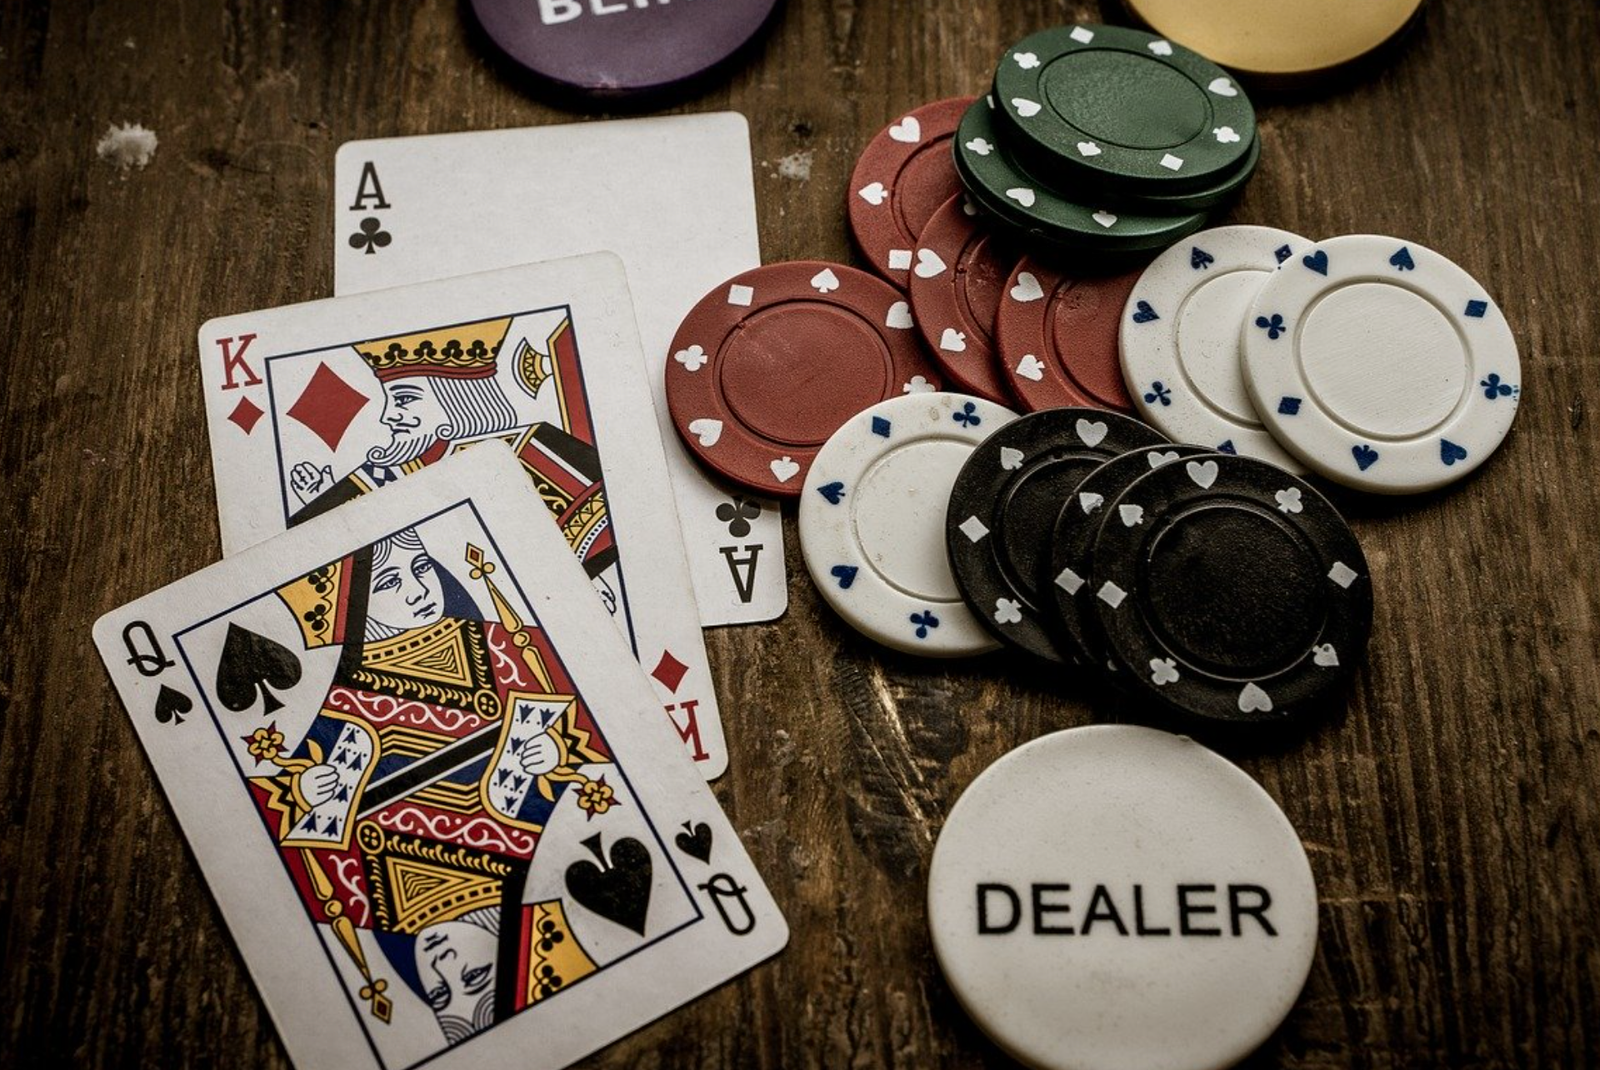 5 Things Professional Poker Players Do That Amateurs Don't